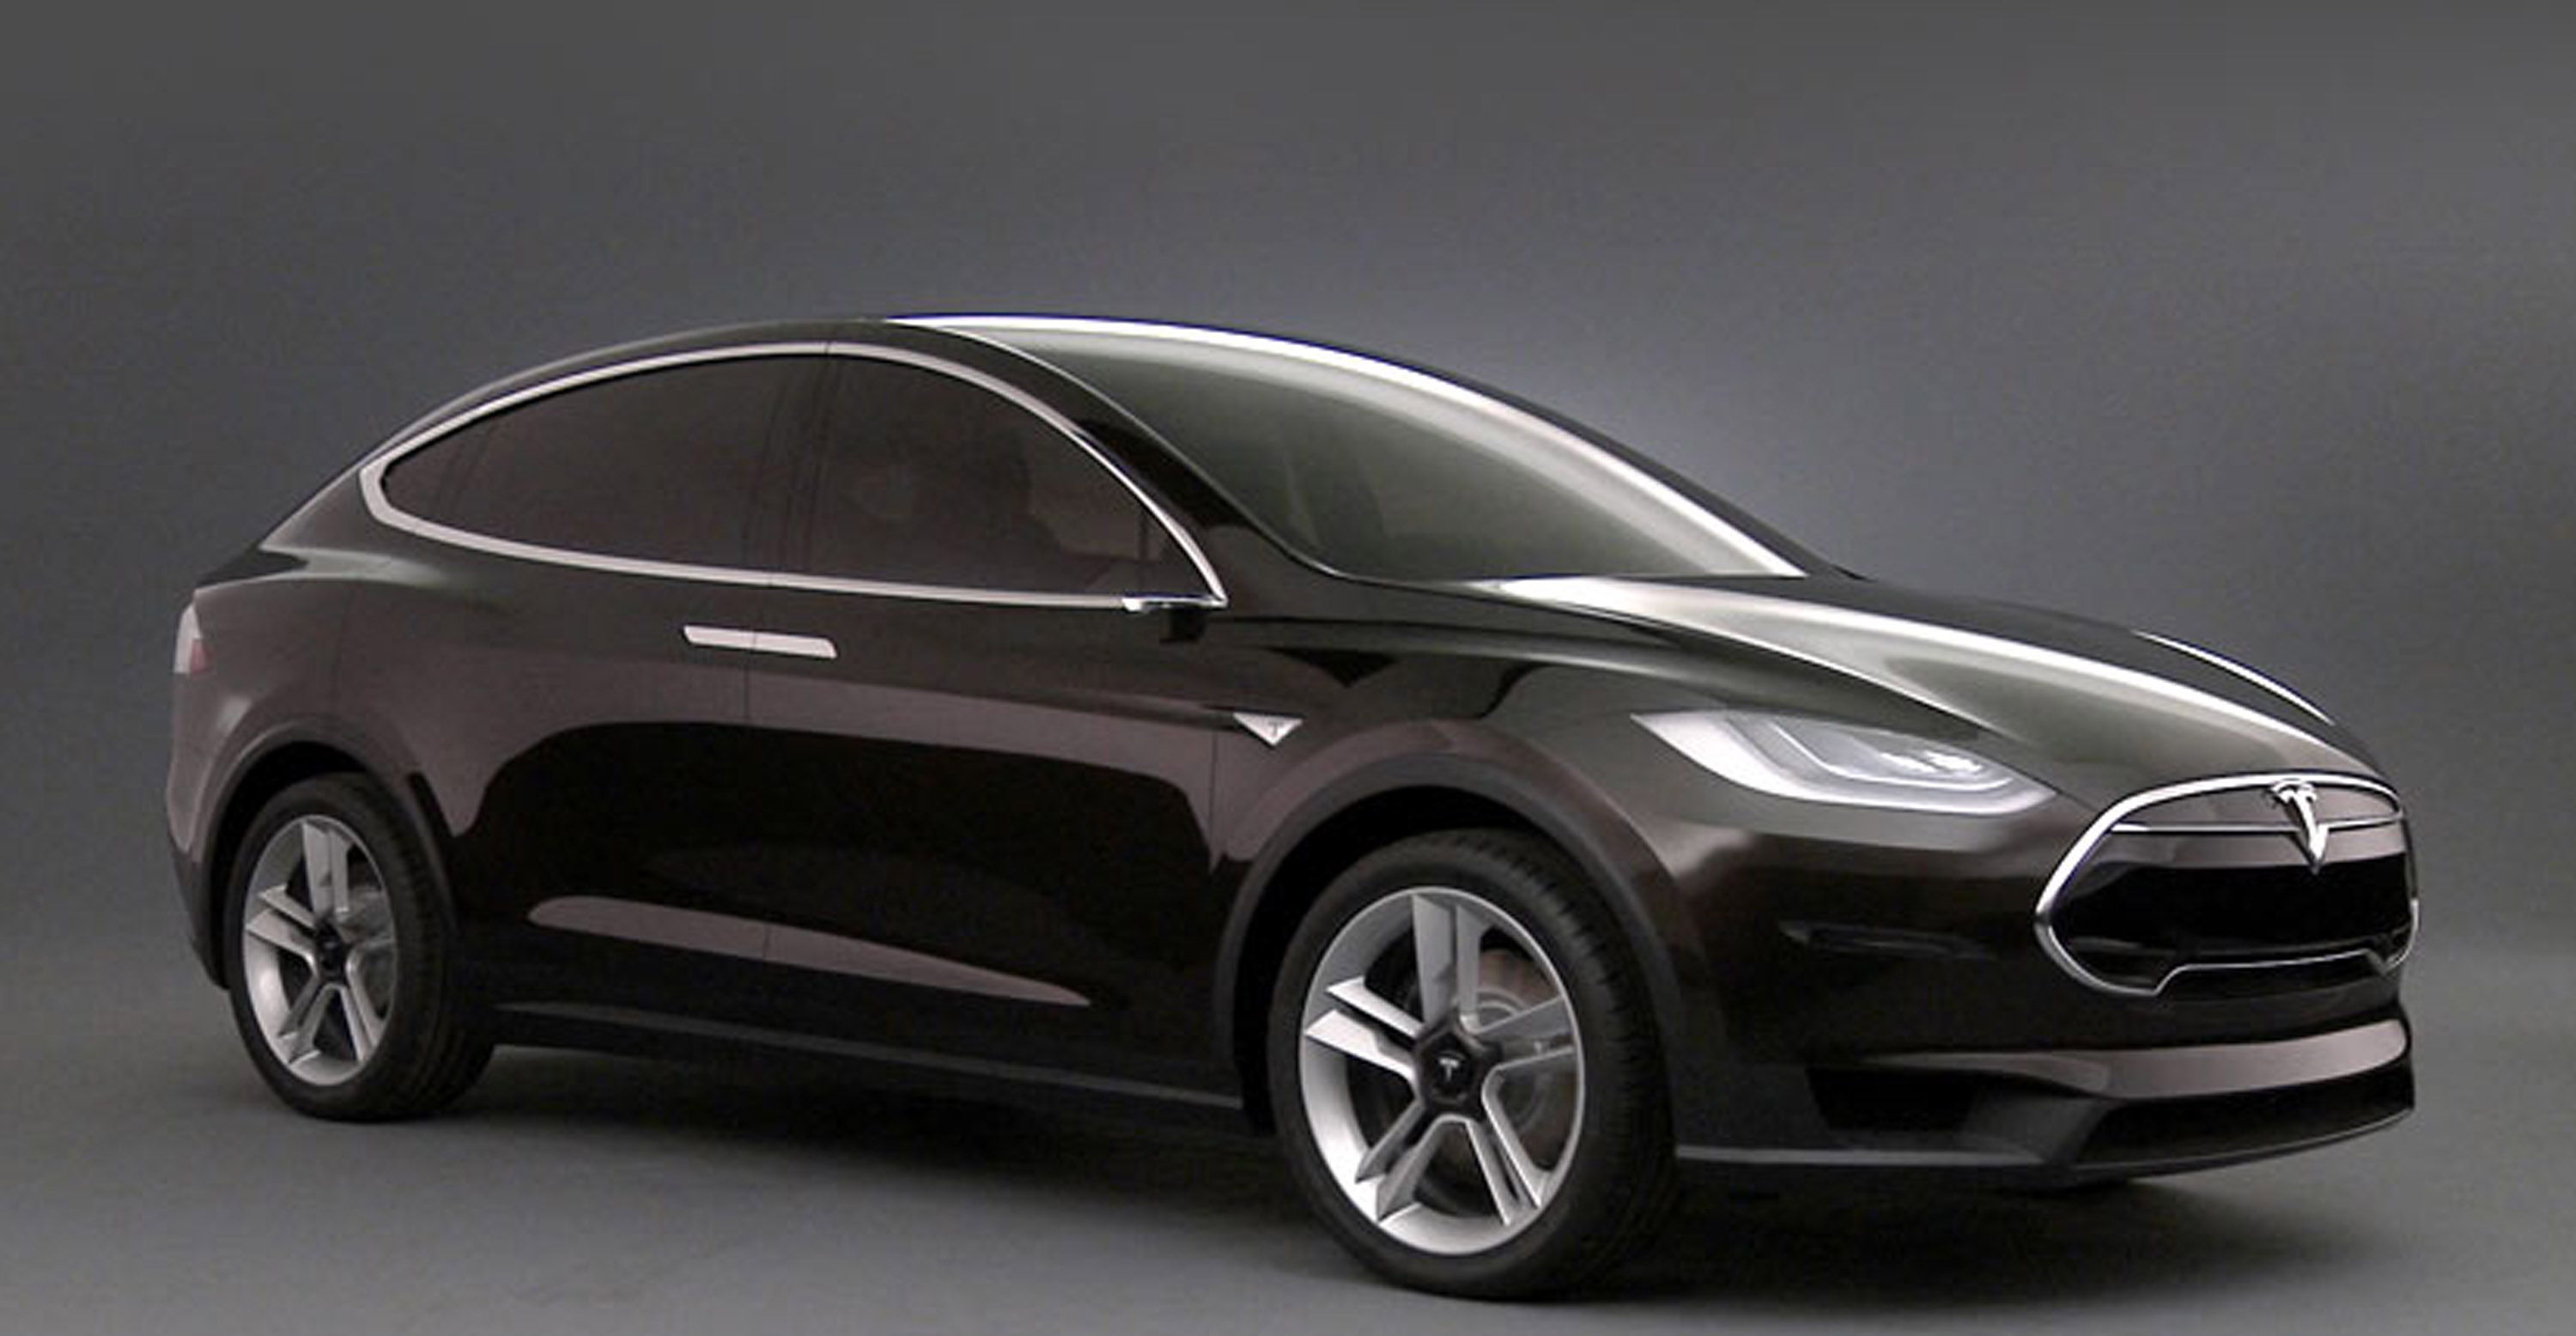 2015 tesla model x comes with revolutionary features